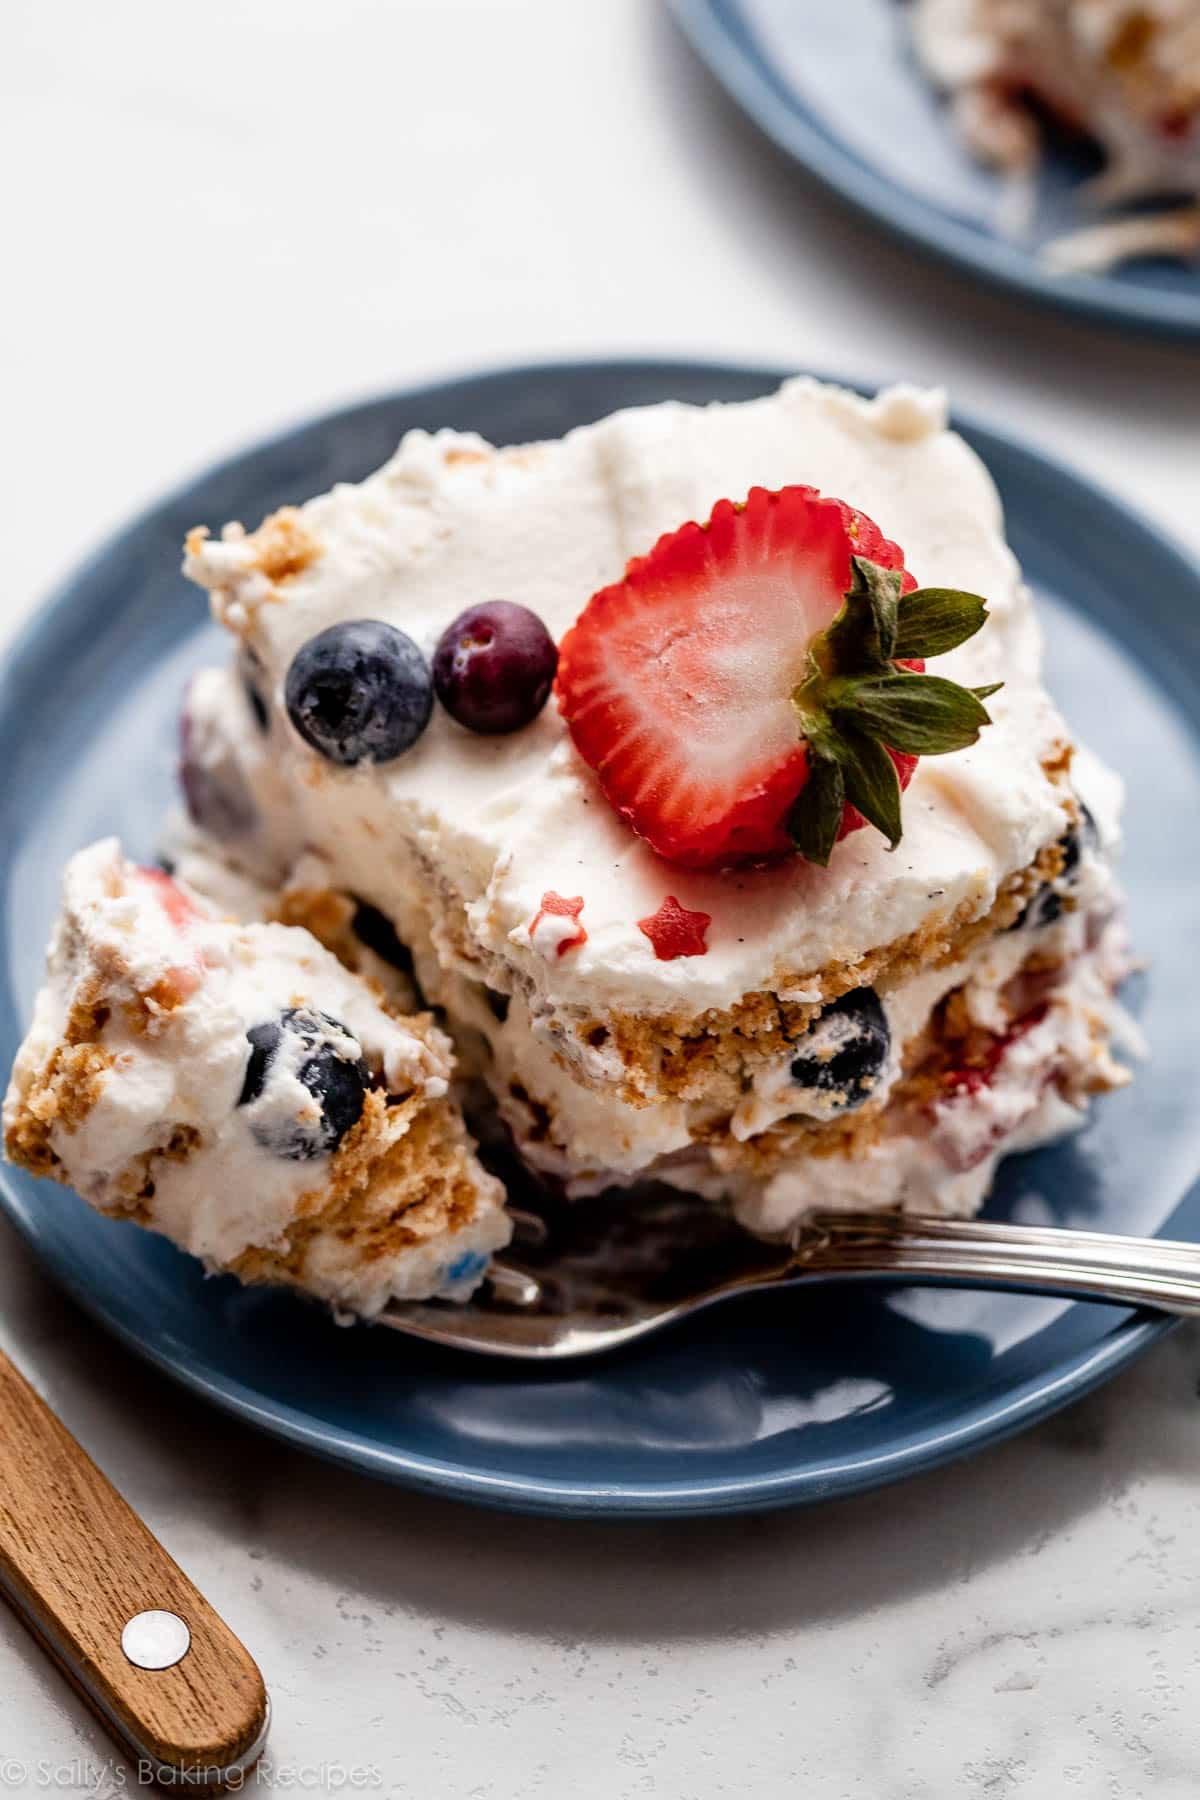 slice of icebox cake with vanilla whipped cream between the layers and strawberry and blueberries on top.